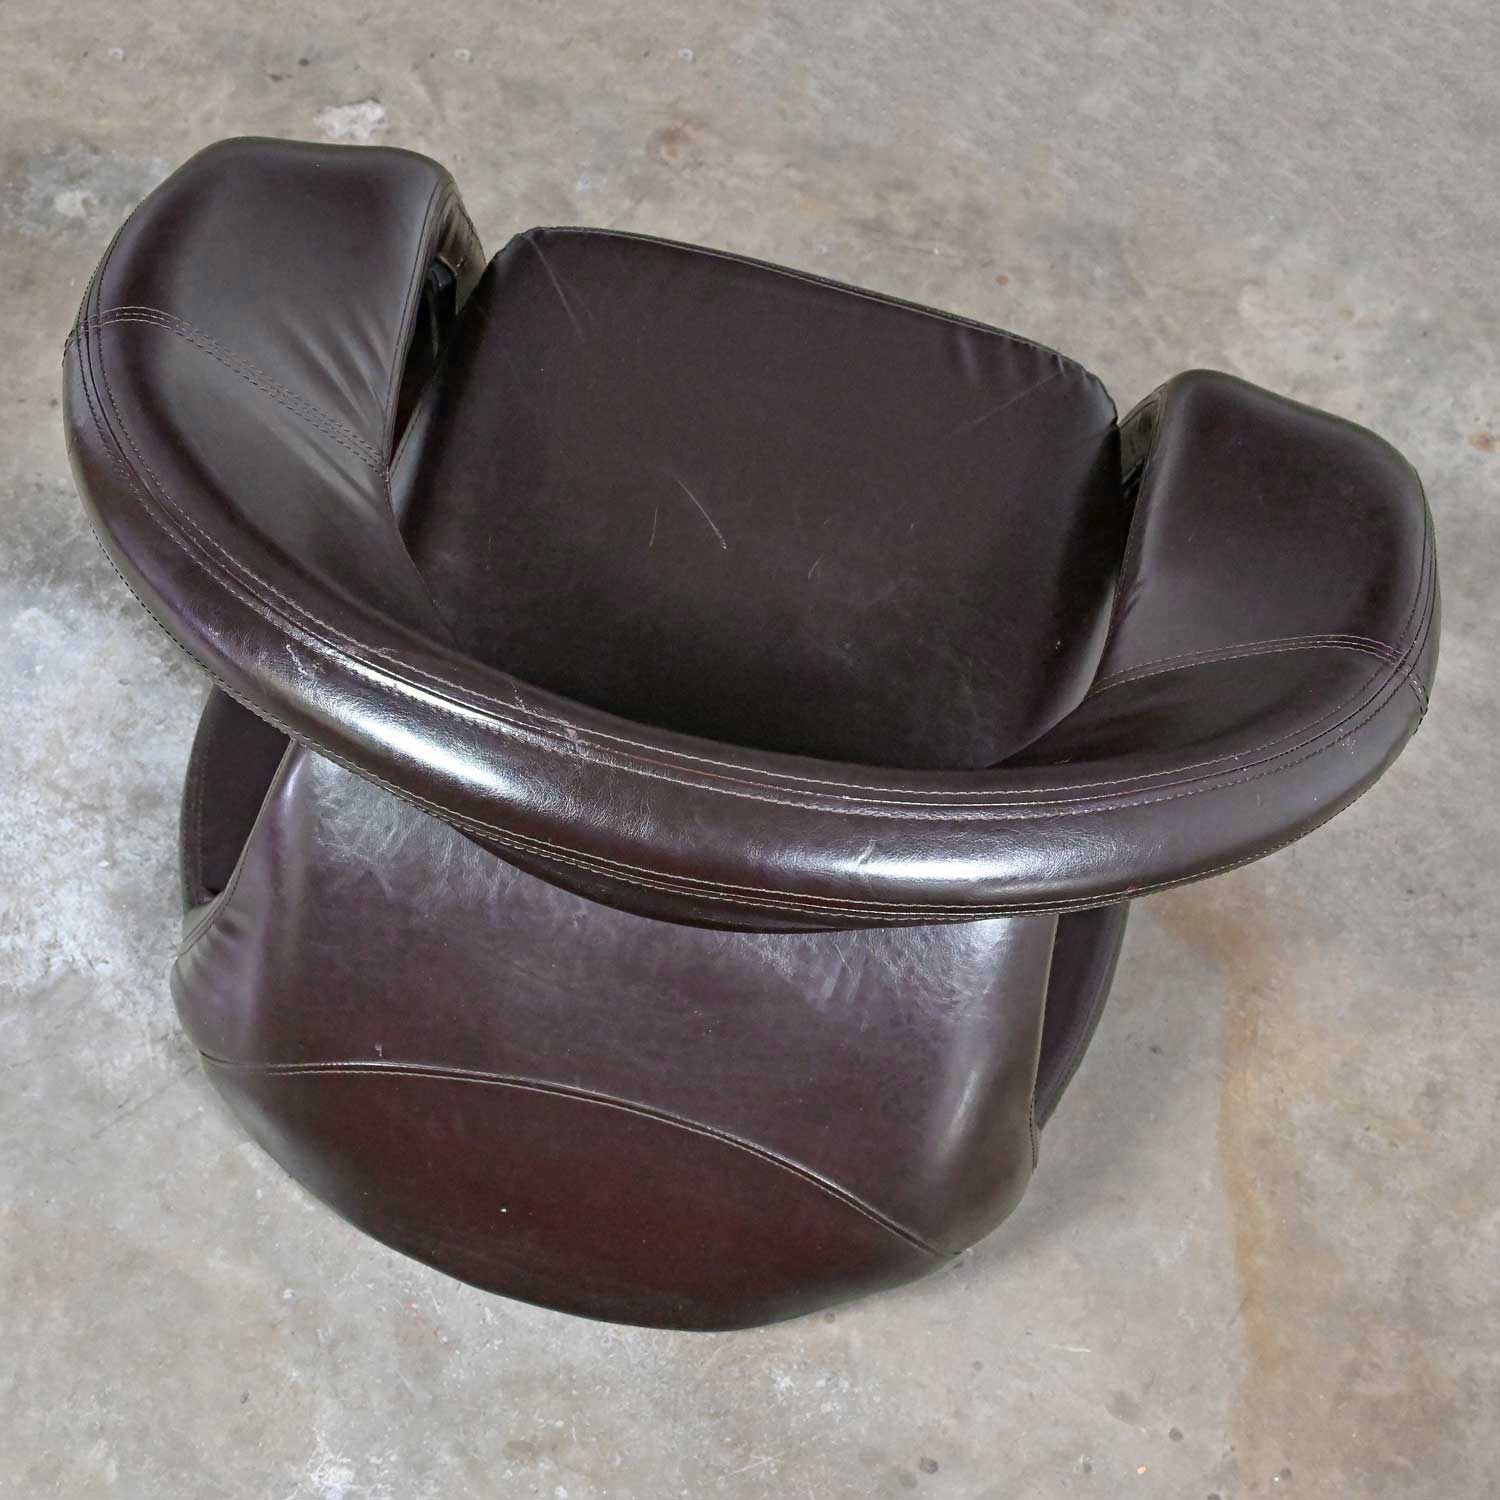 Late 20th Century Postmodern Brown Faux Leather Tongue Chair Attributed to Jaymar Cantilevered Pop Art Chair